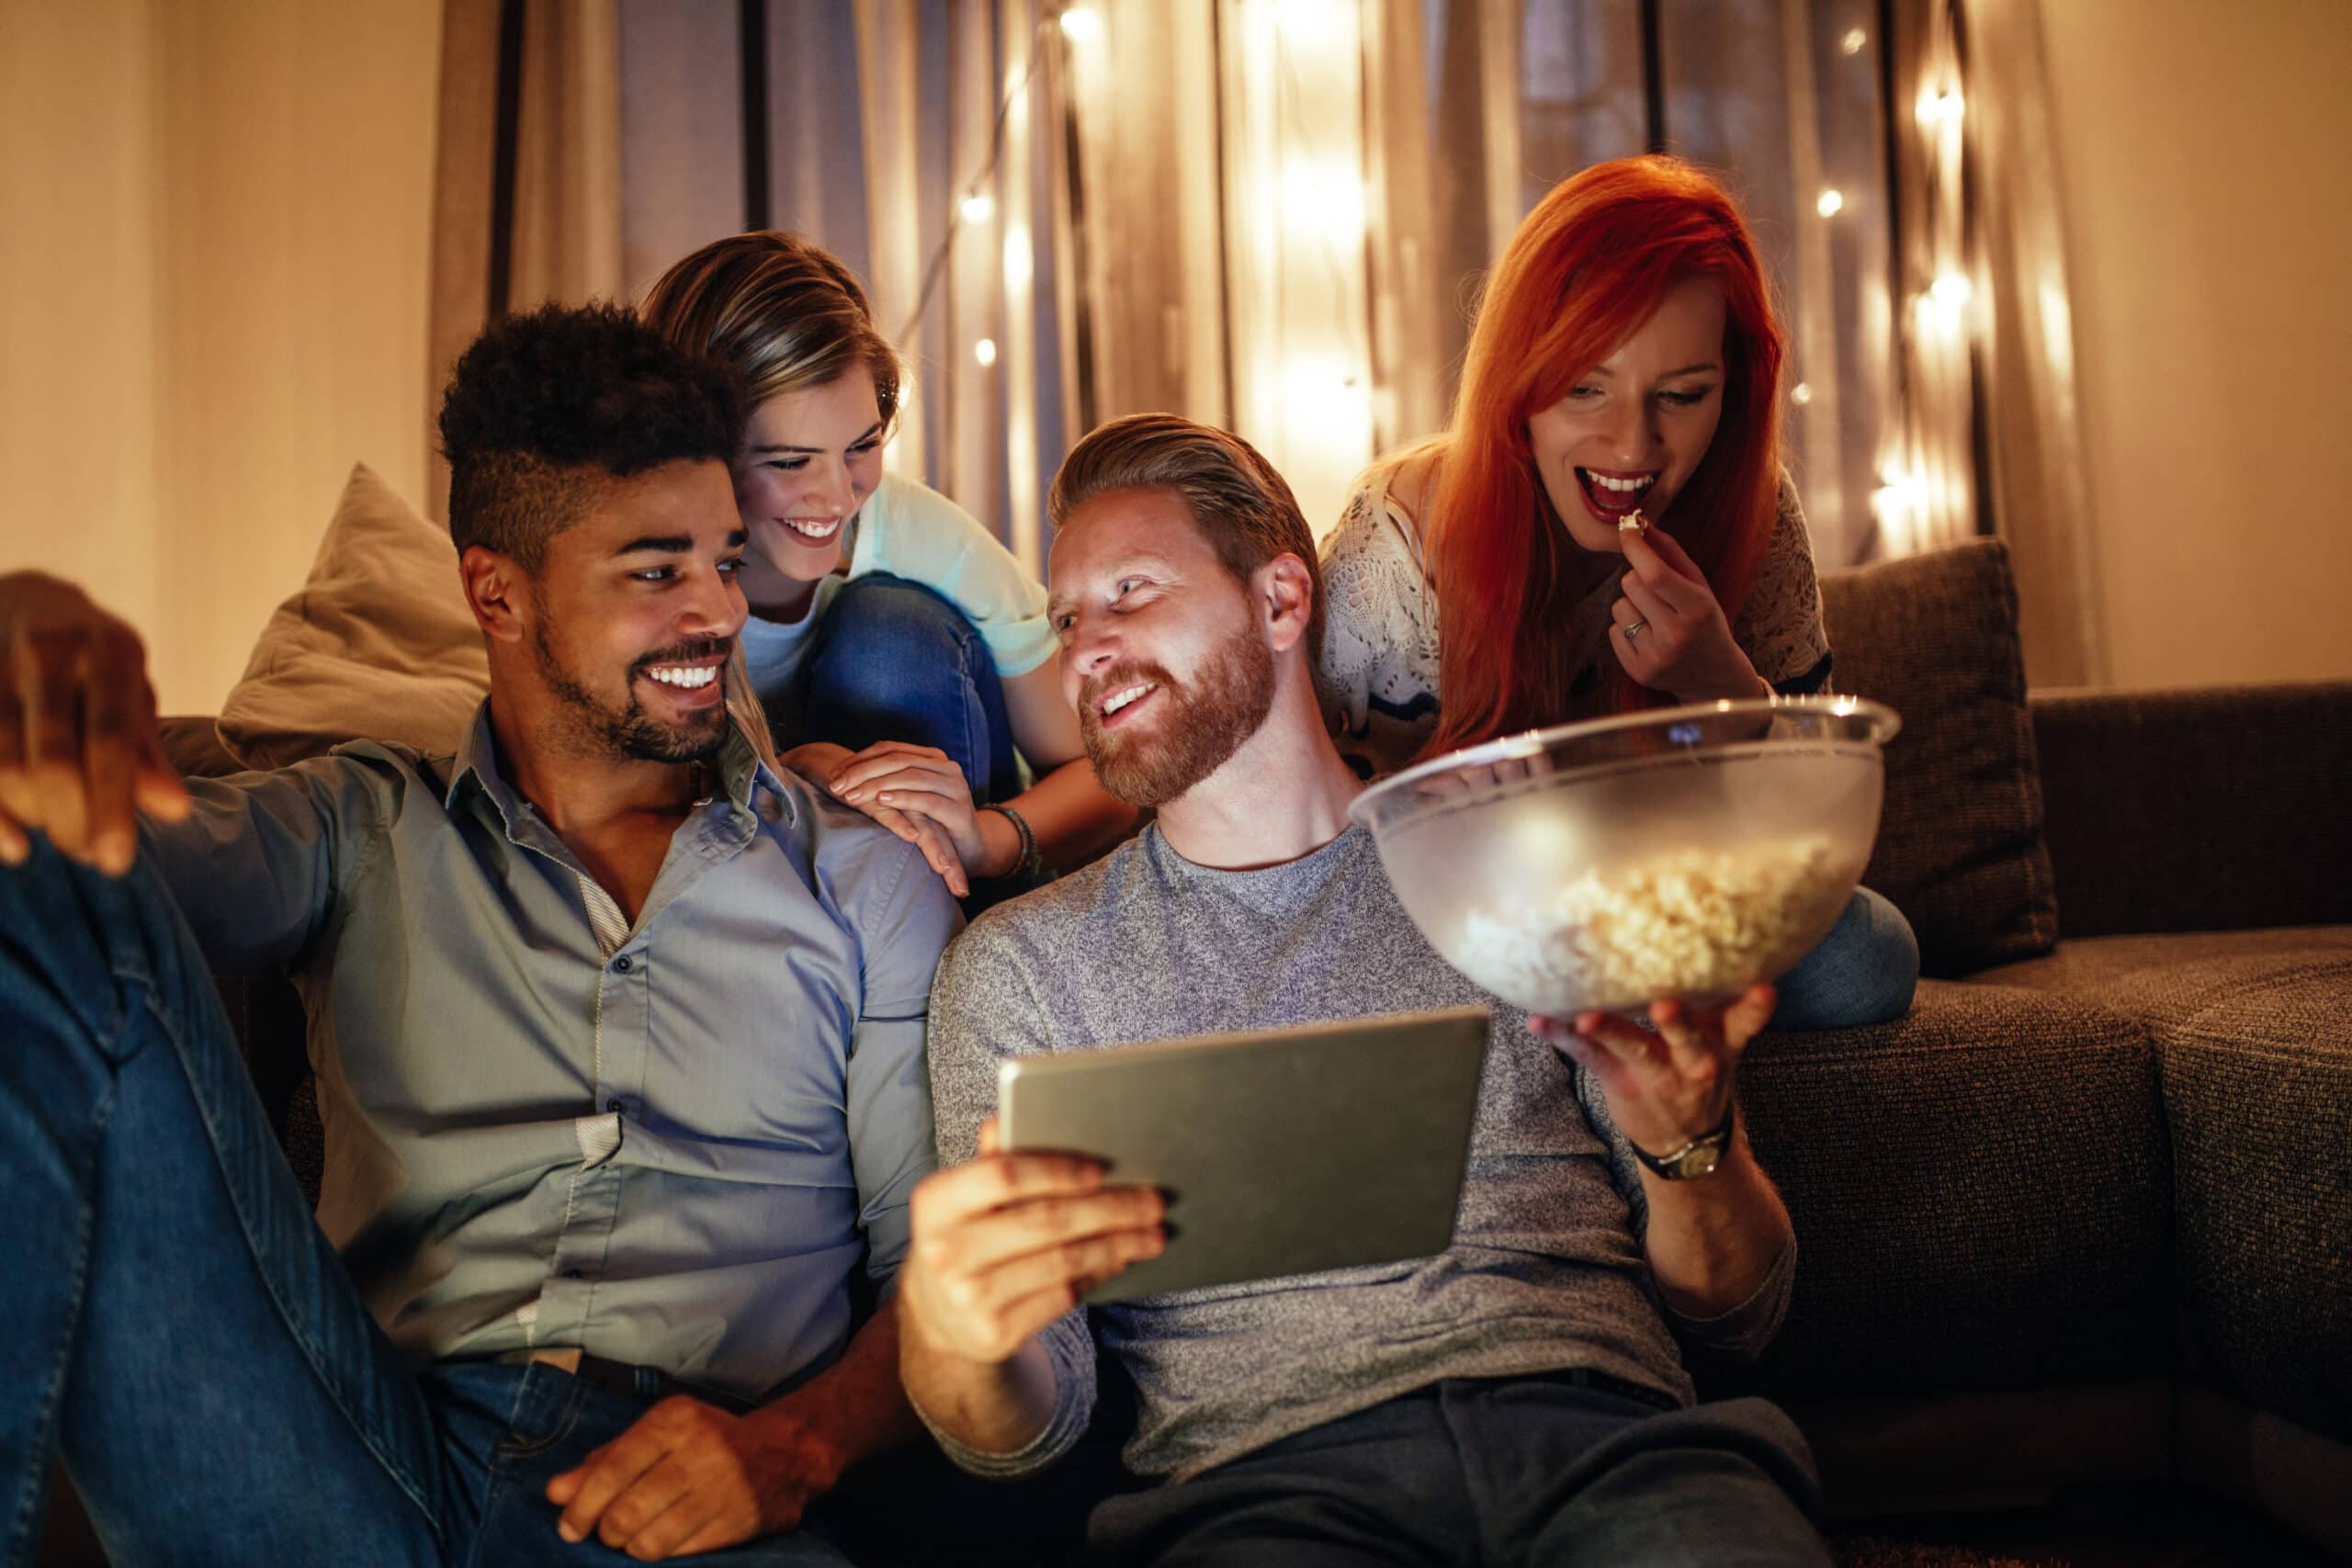 Stock image of friends watching a movie - Start your property journey on Share to Buy!